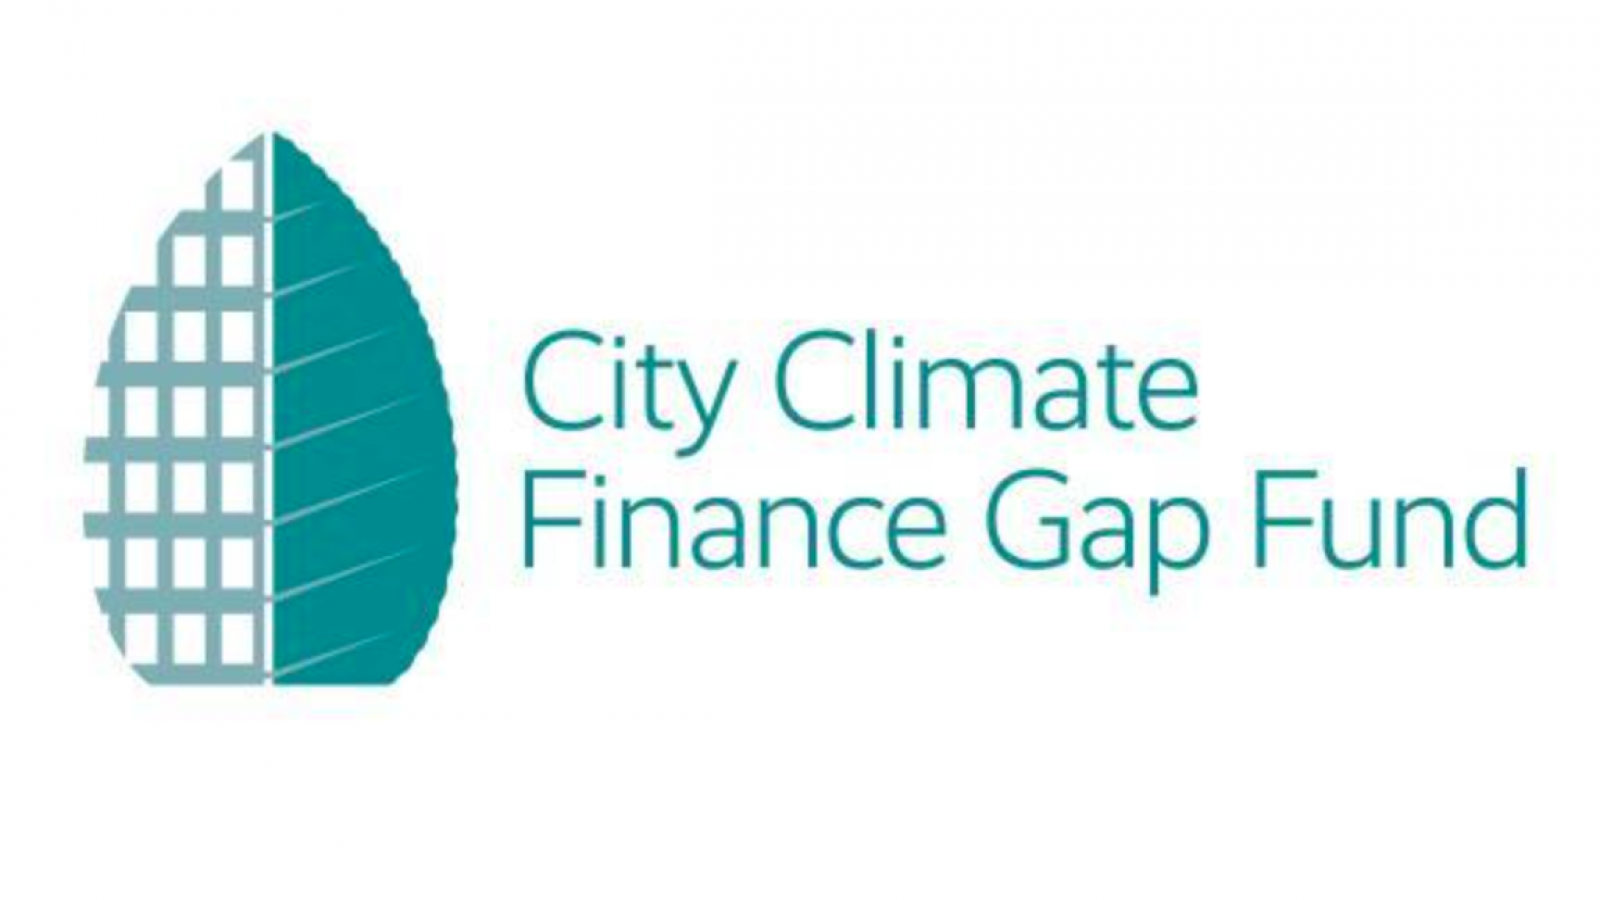 Ukraine: EIB climate finance to help Lviv become more pedestrian and cycle friendly